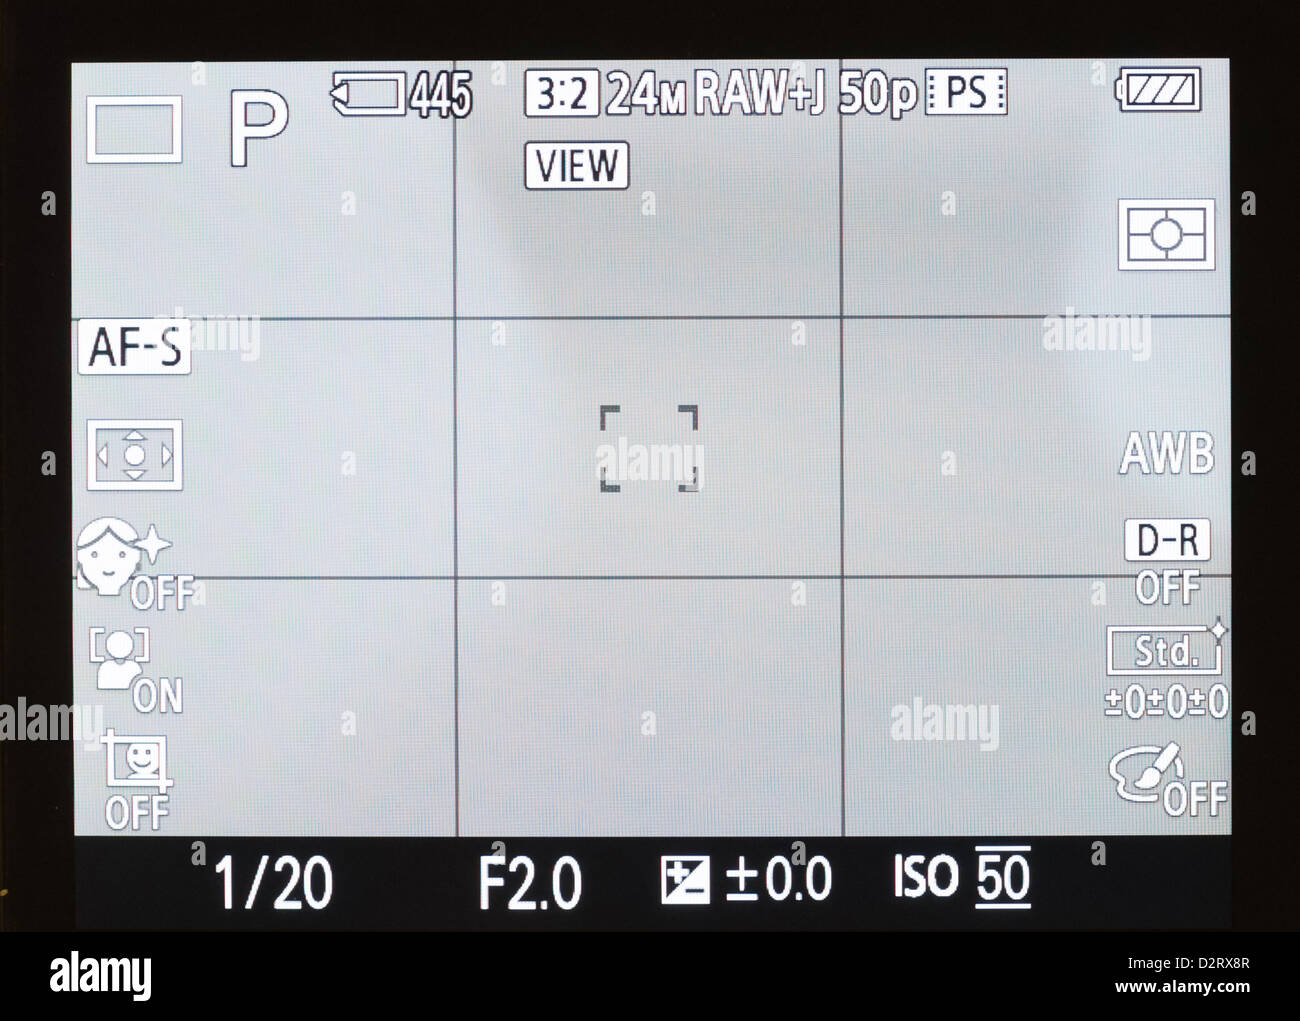 Sony Cyber-shot RX1 full frame digital camera. Rear LCD screen showing settings, and rule of thirds grid lines. Stock Photo